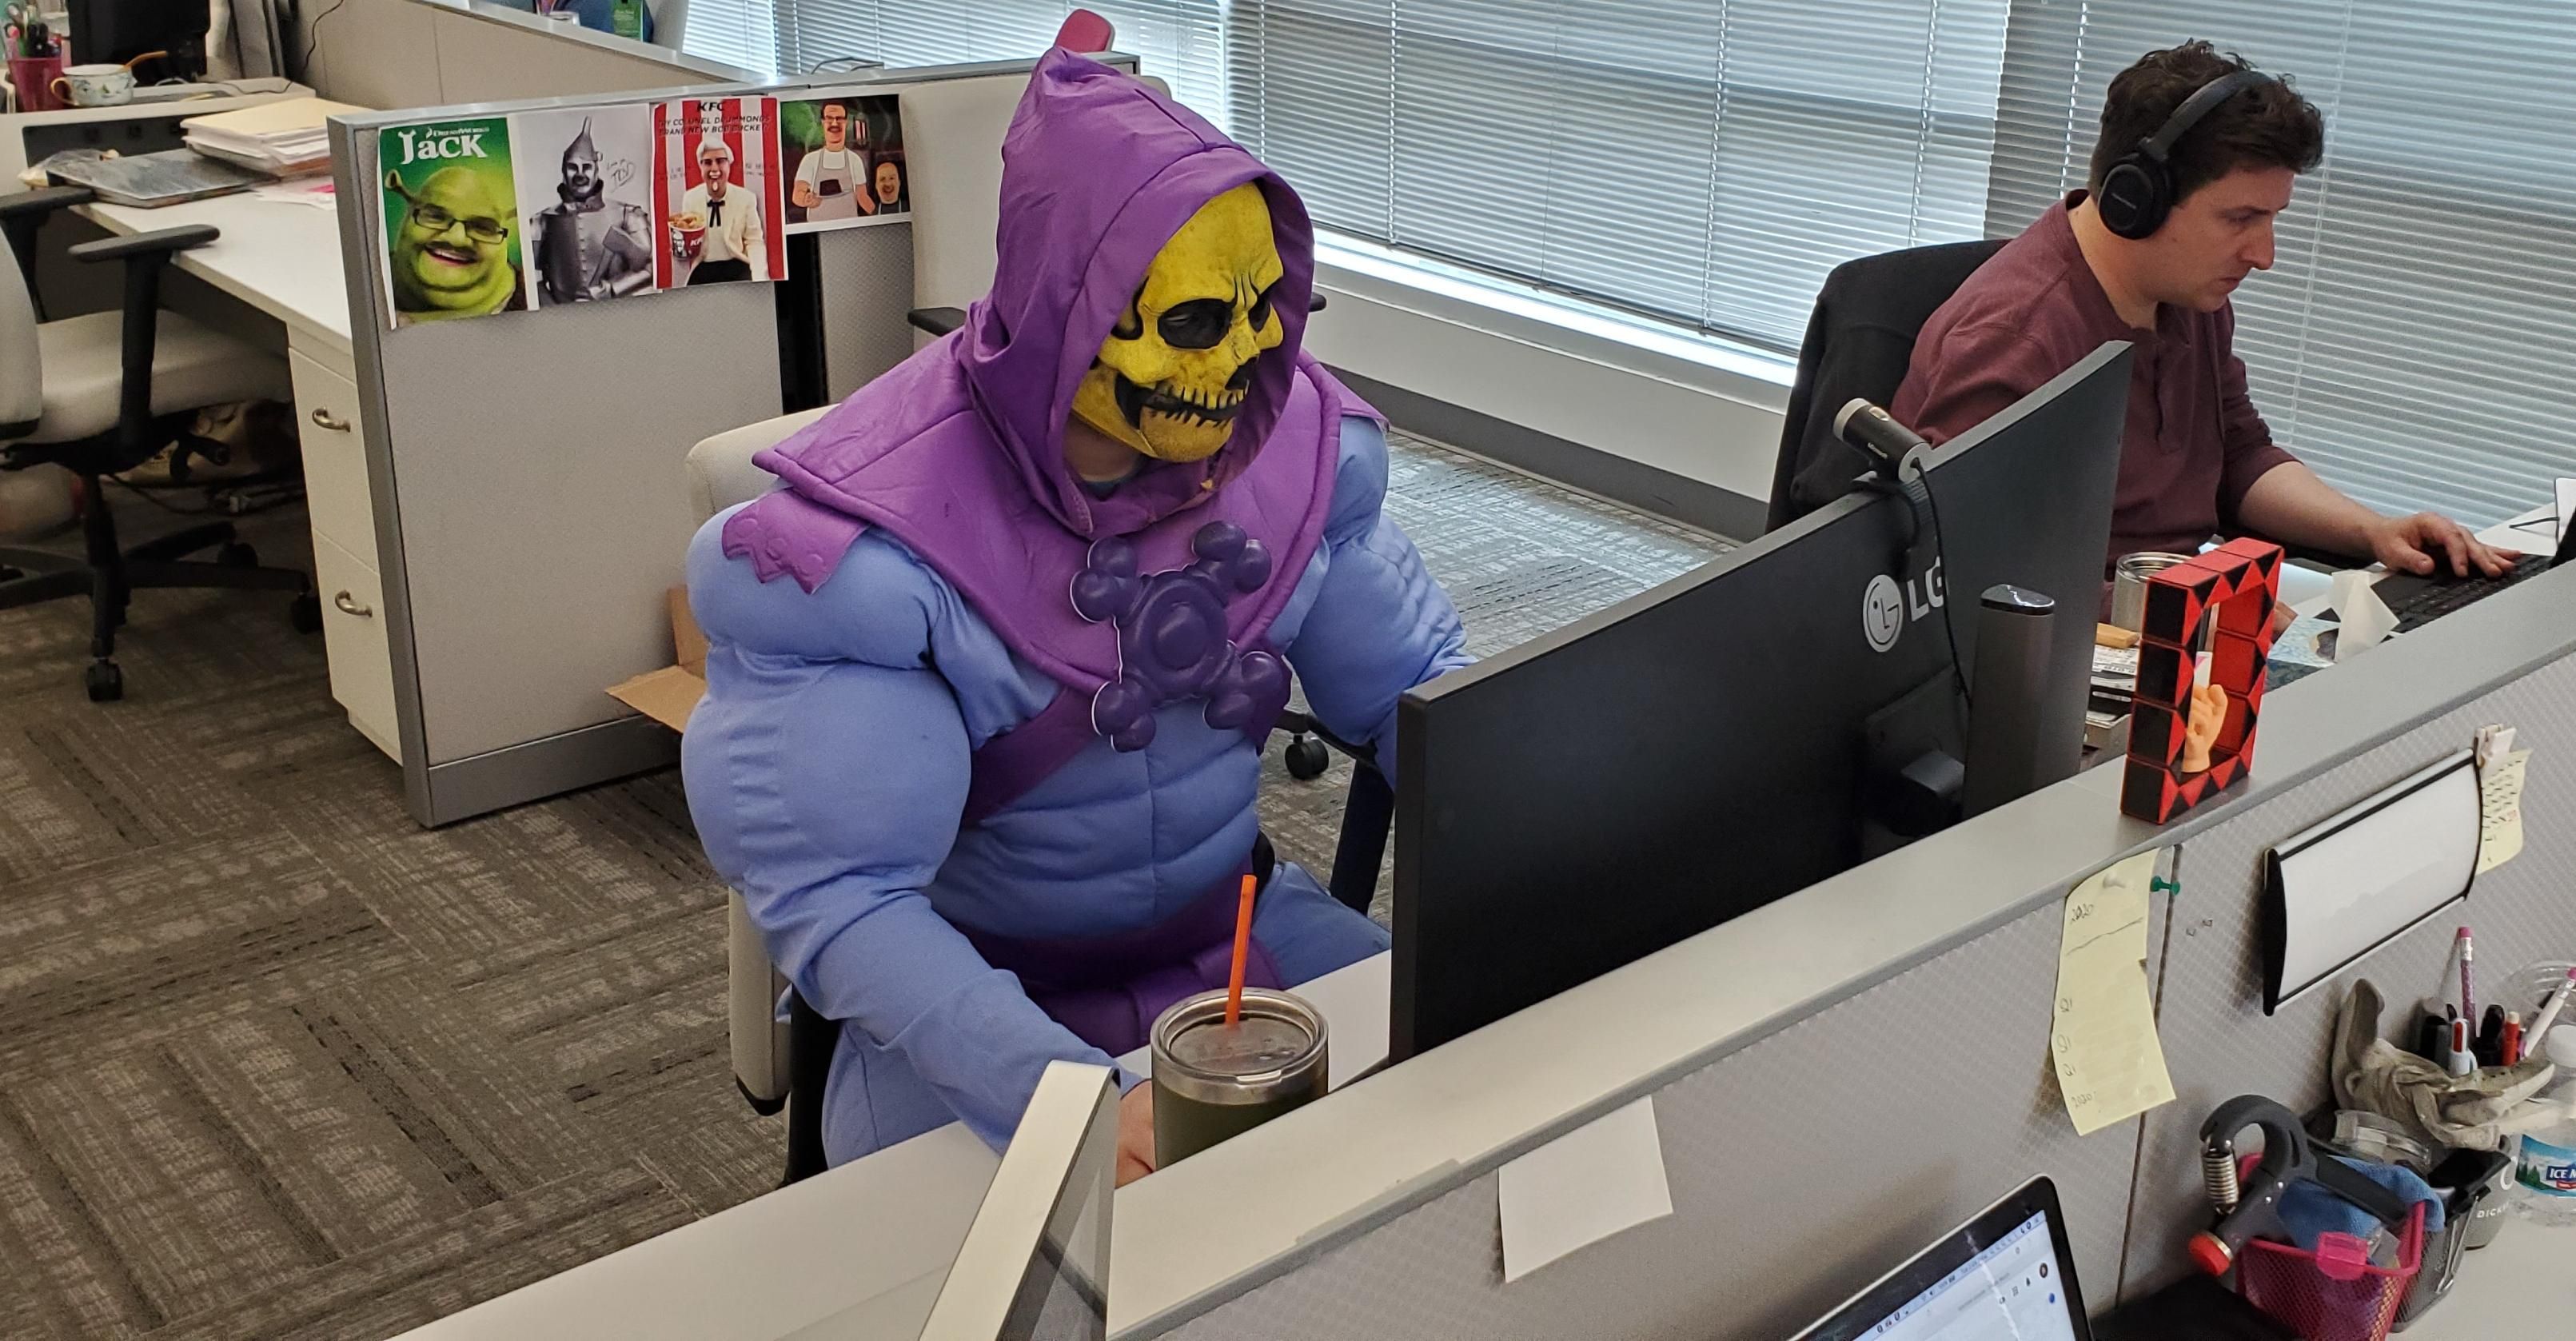 "I'd like to conquer Castle Greyskull, sure. But these finance reports are due by 4:30 and they ain't gonna do themselves."